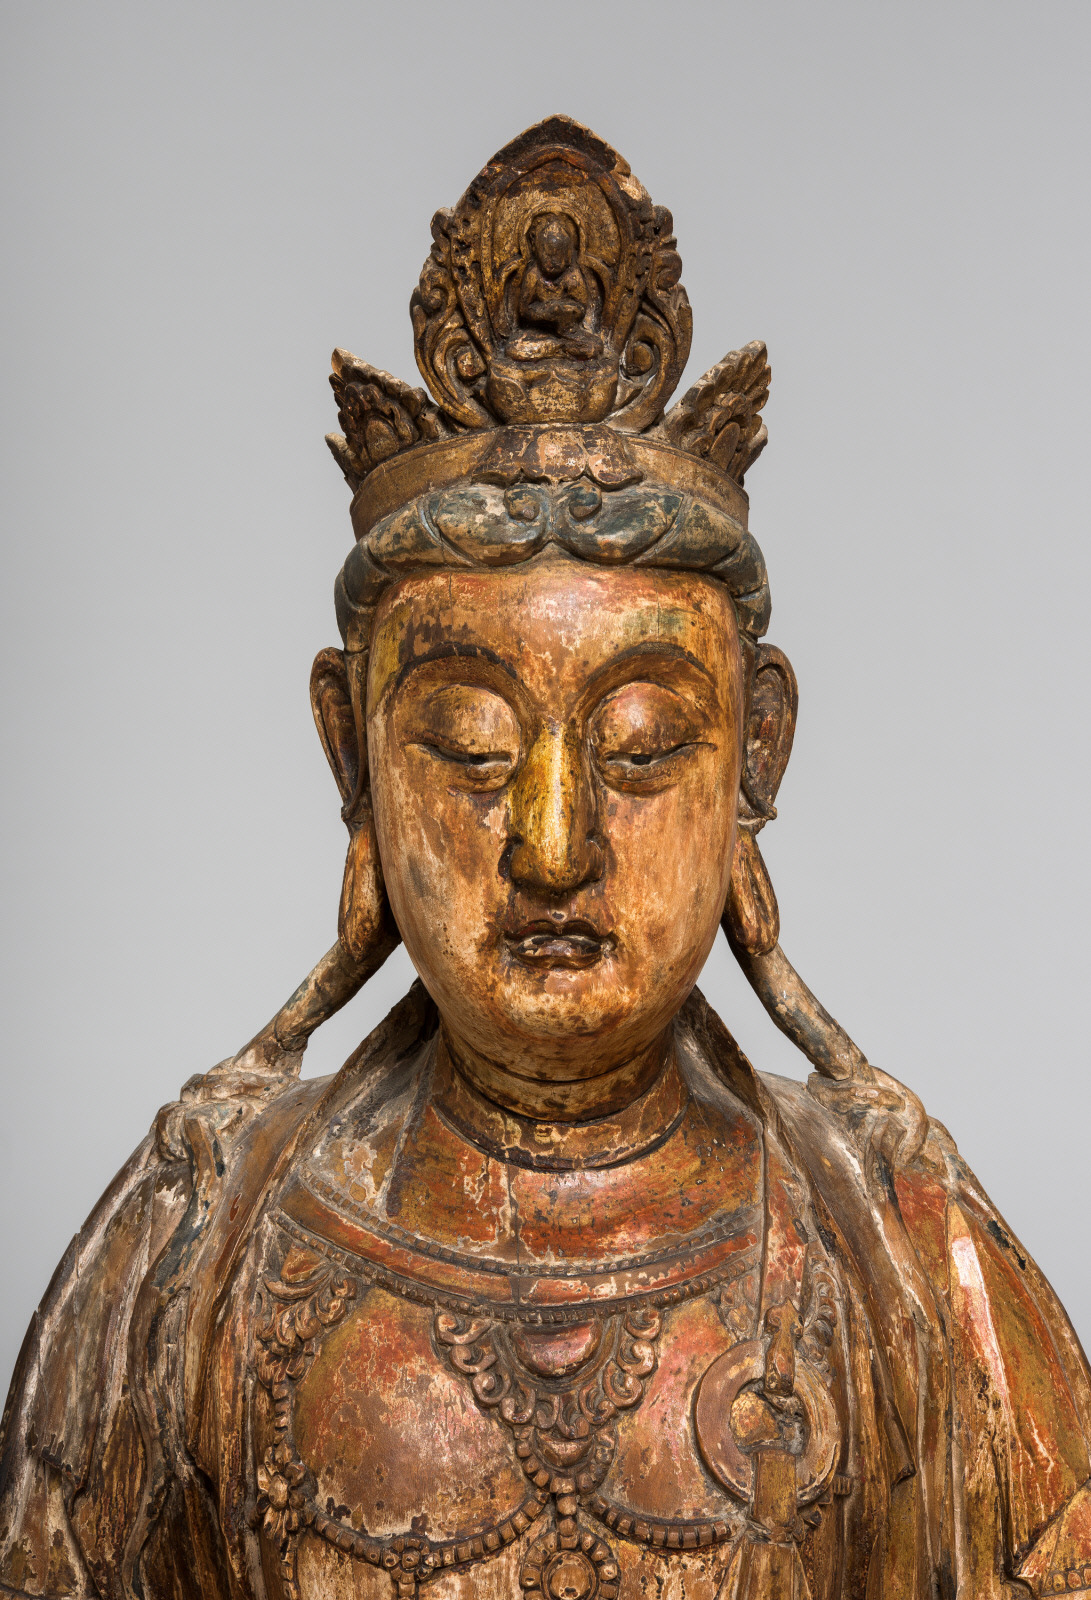 Image Title:   Guanyin Bodhisattva (detail)  Chinese, Song-Yuan Dynasty, mid-13th century  Wood with traces of pigment and gilt  h. 50 in. (127 cm); w. 29 in. (73.7 cm); d. 16 in. (40.6 cm